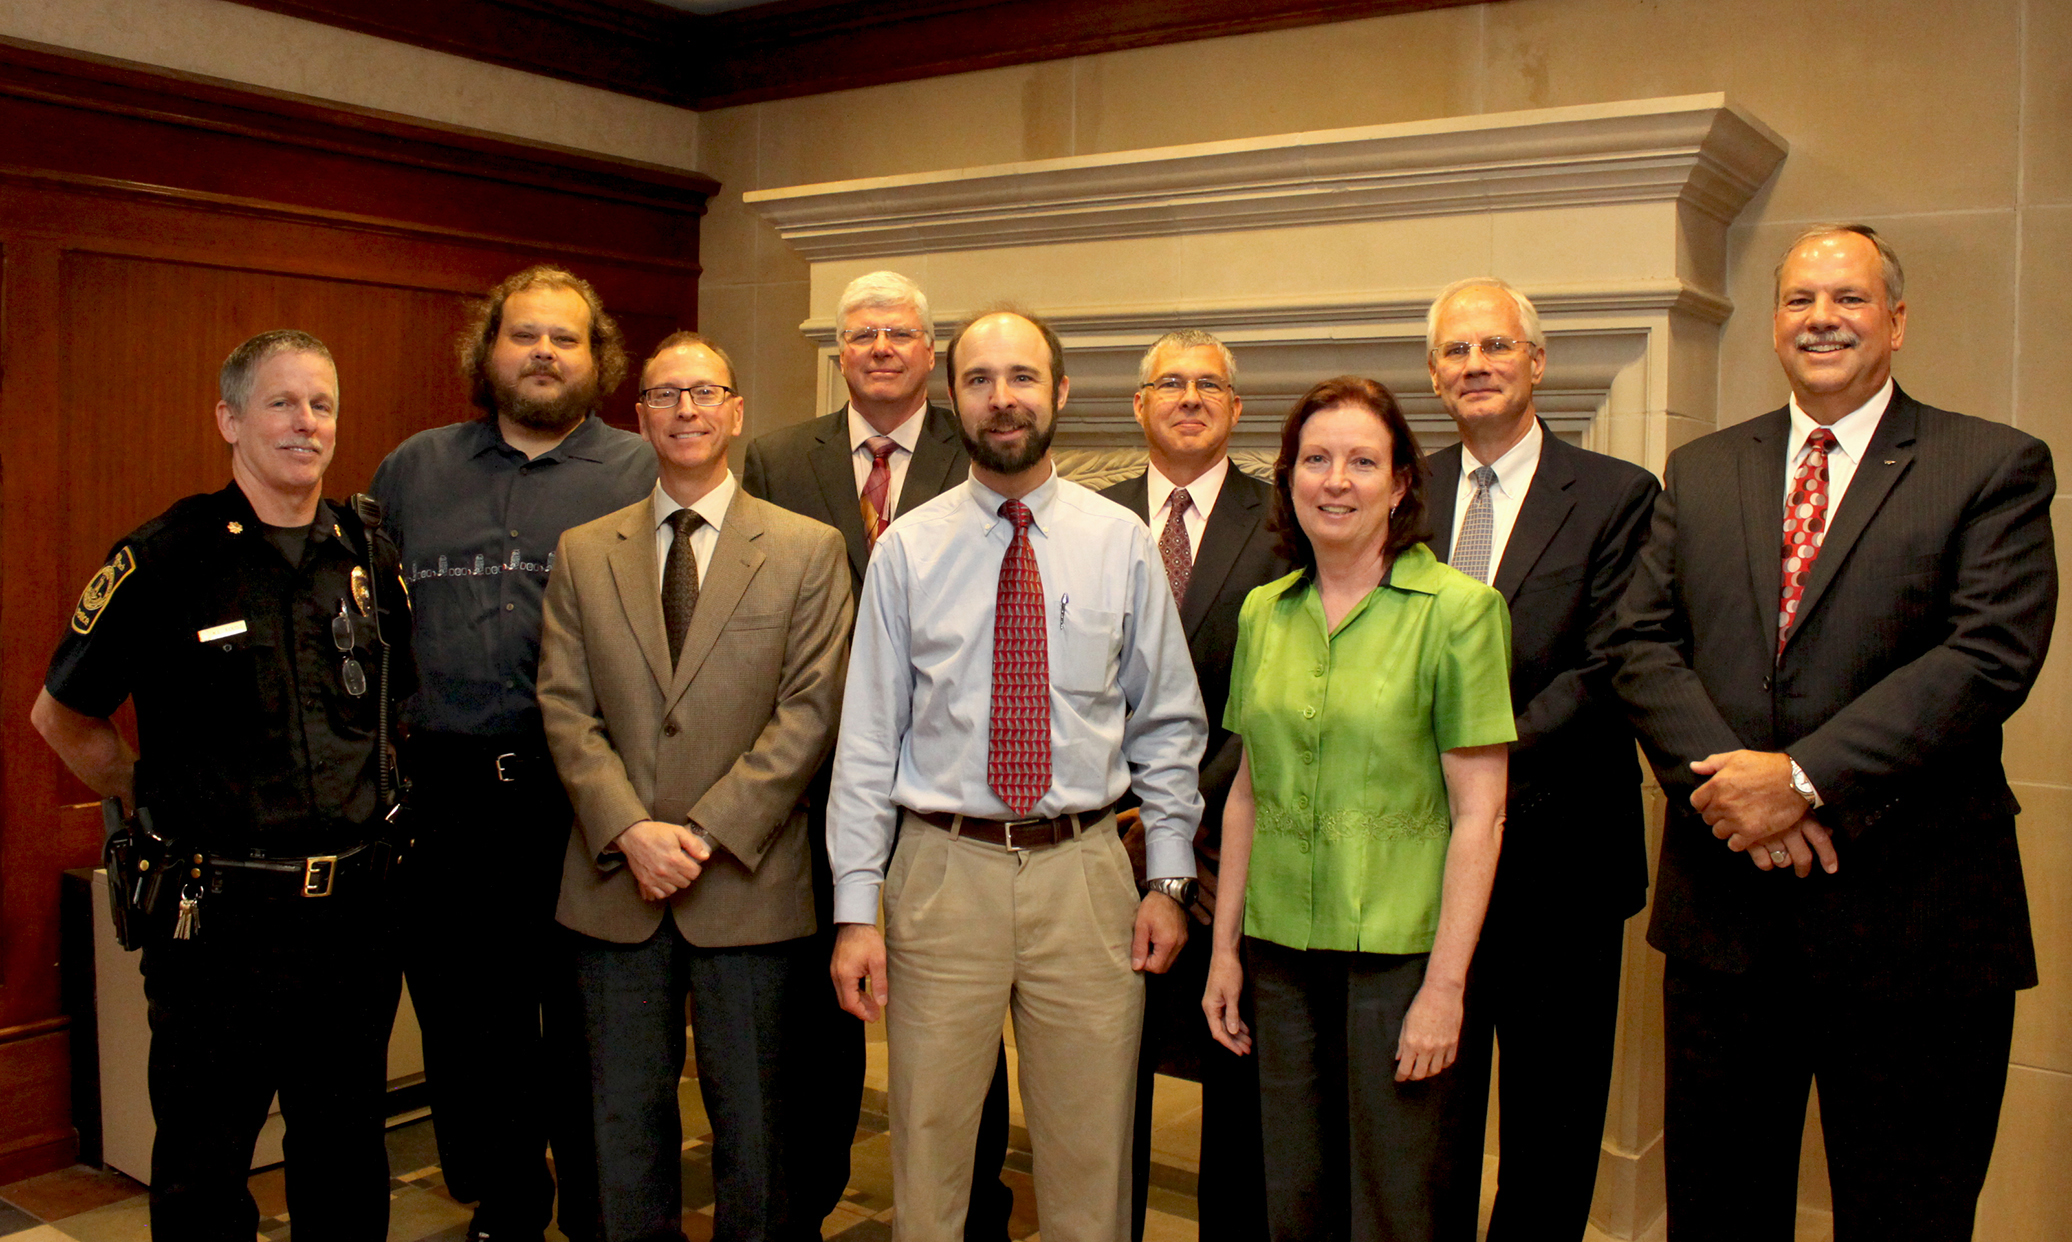 Group photo of developers and contributors to technology initiatives improving safety and security on campus.